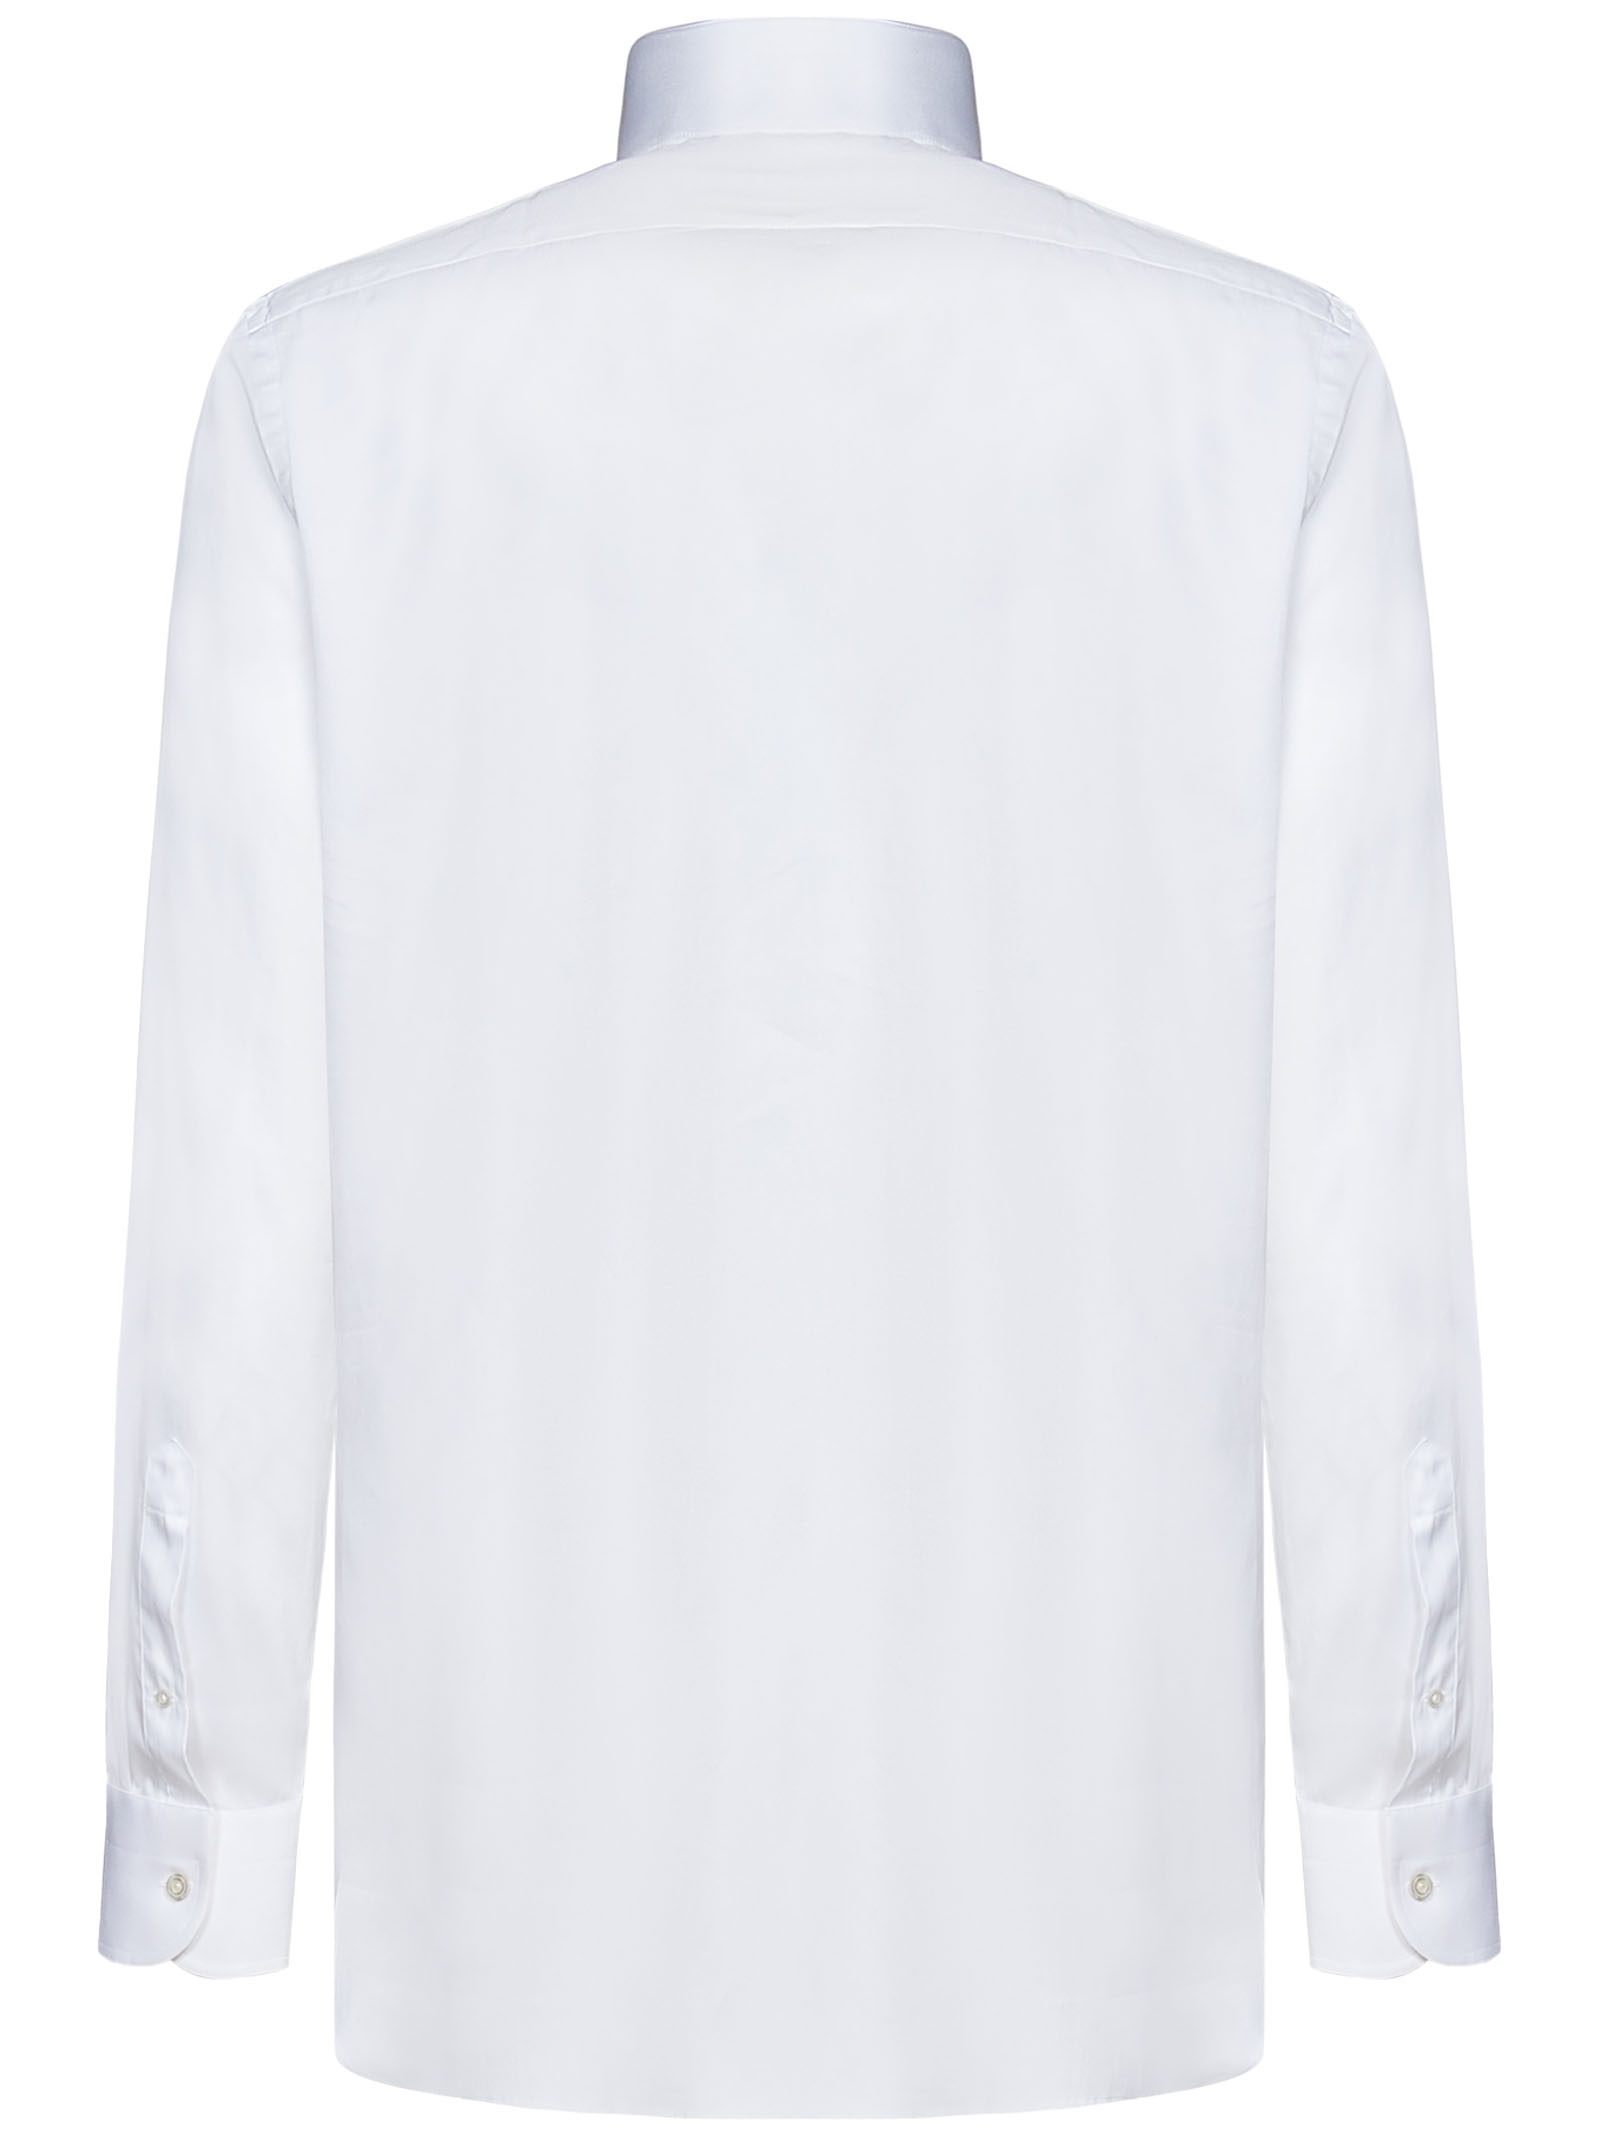 Optical white cotton and silk tuxedo shirt with pleated plastron and wing collar. - 2